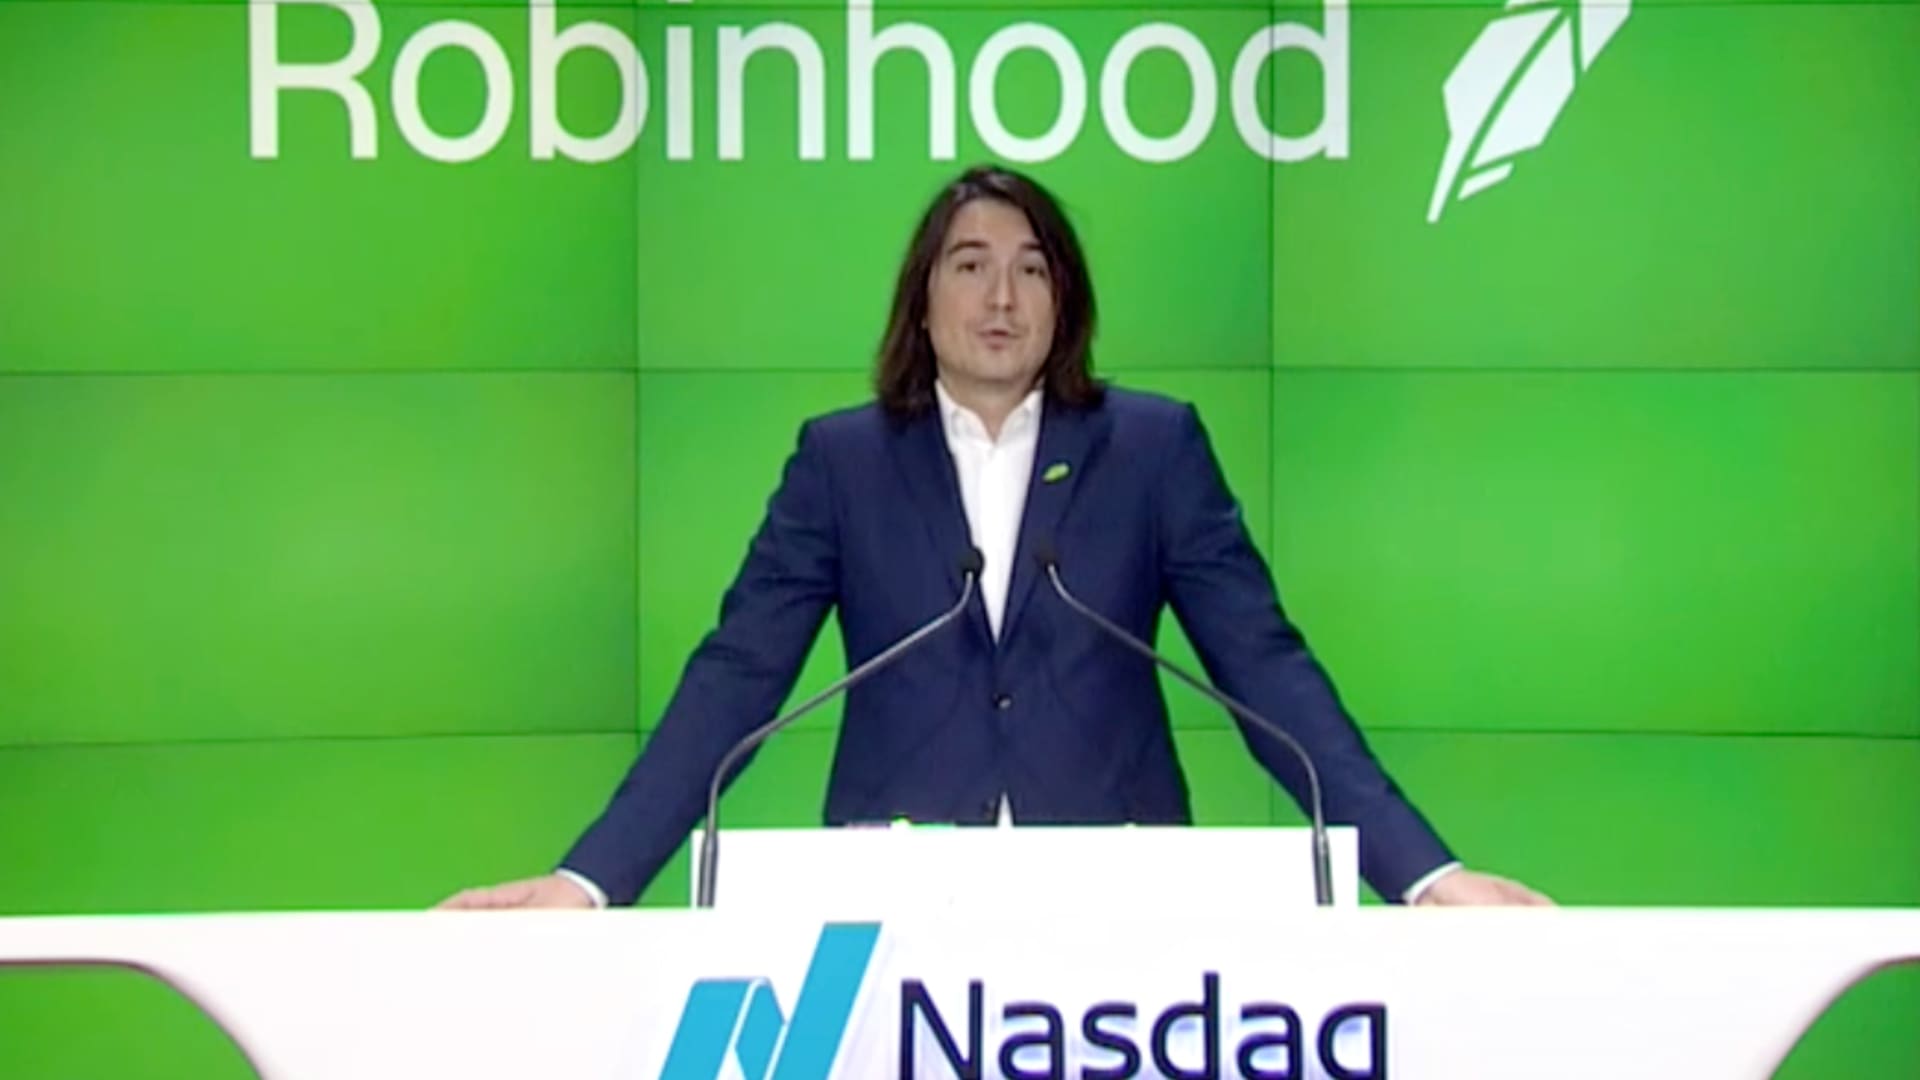 Robinhood CEO defends payment for order flow, says practice is 'here to stay'